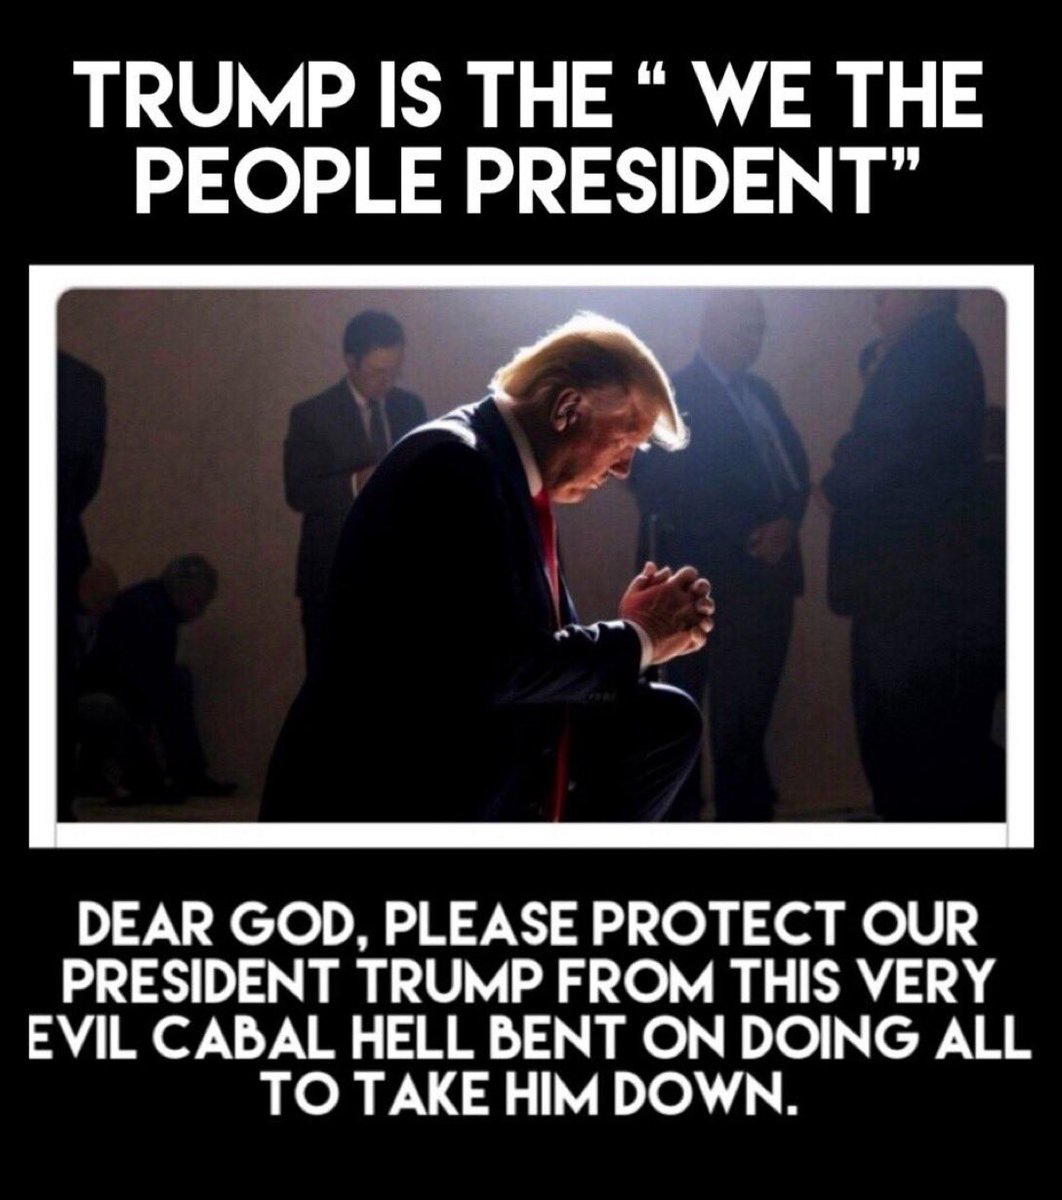 @PapiTrumpo We stand with you, #PresidentTrump.

You are in our prayers. God’s got this.

#Trump2024TheOnlyChoice